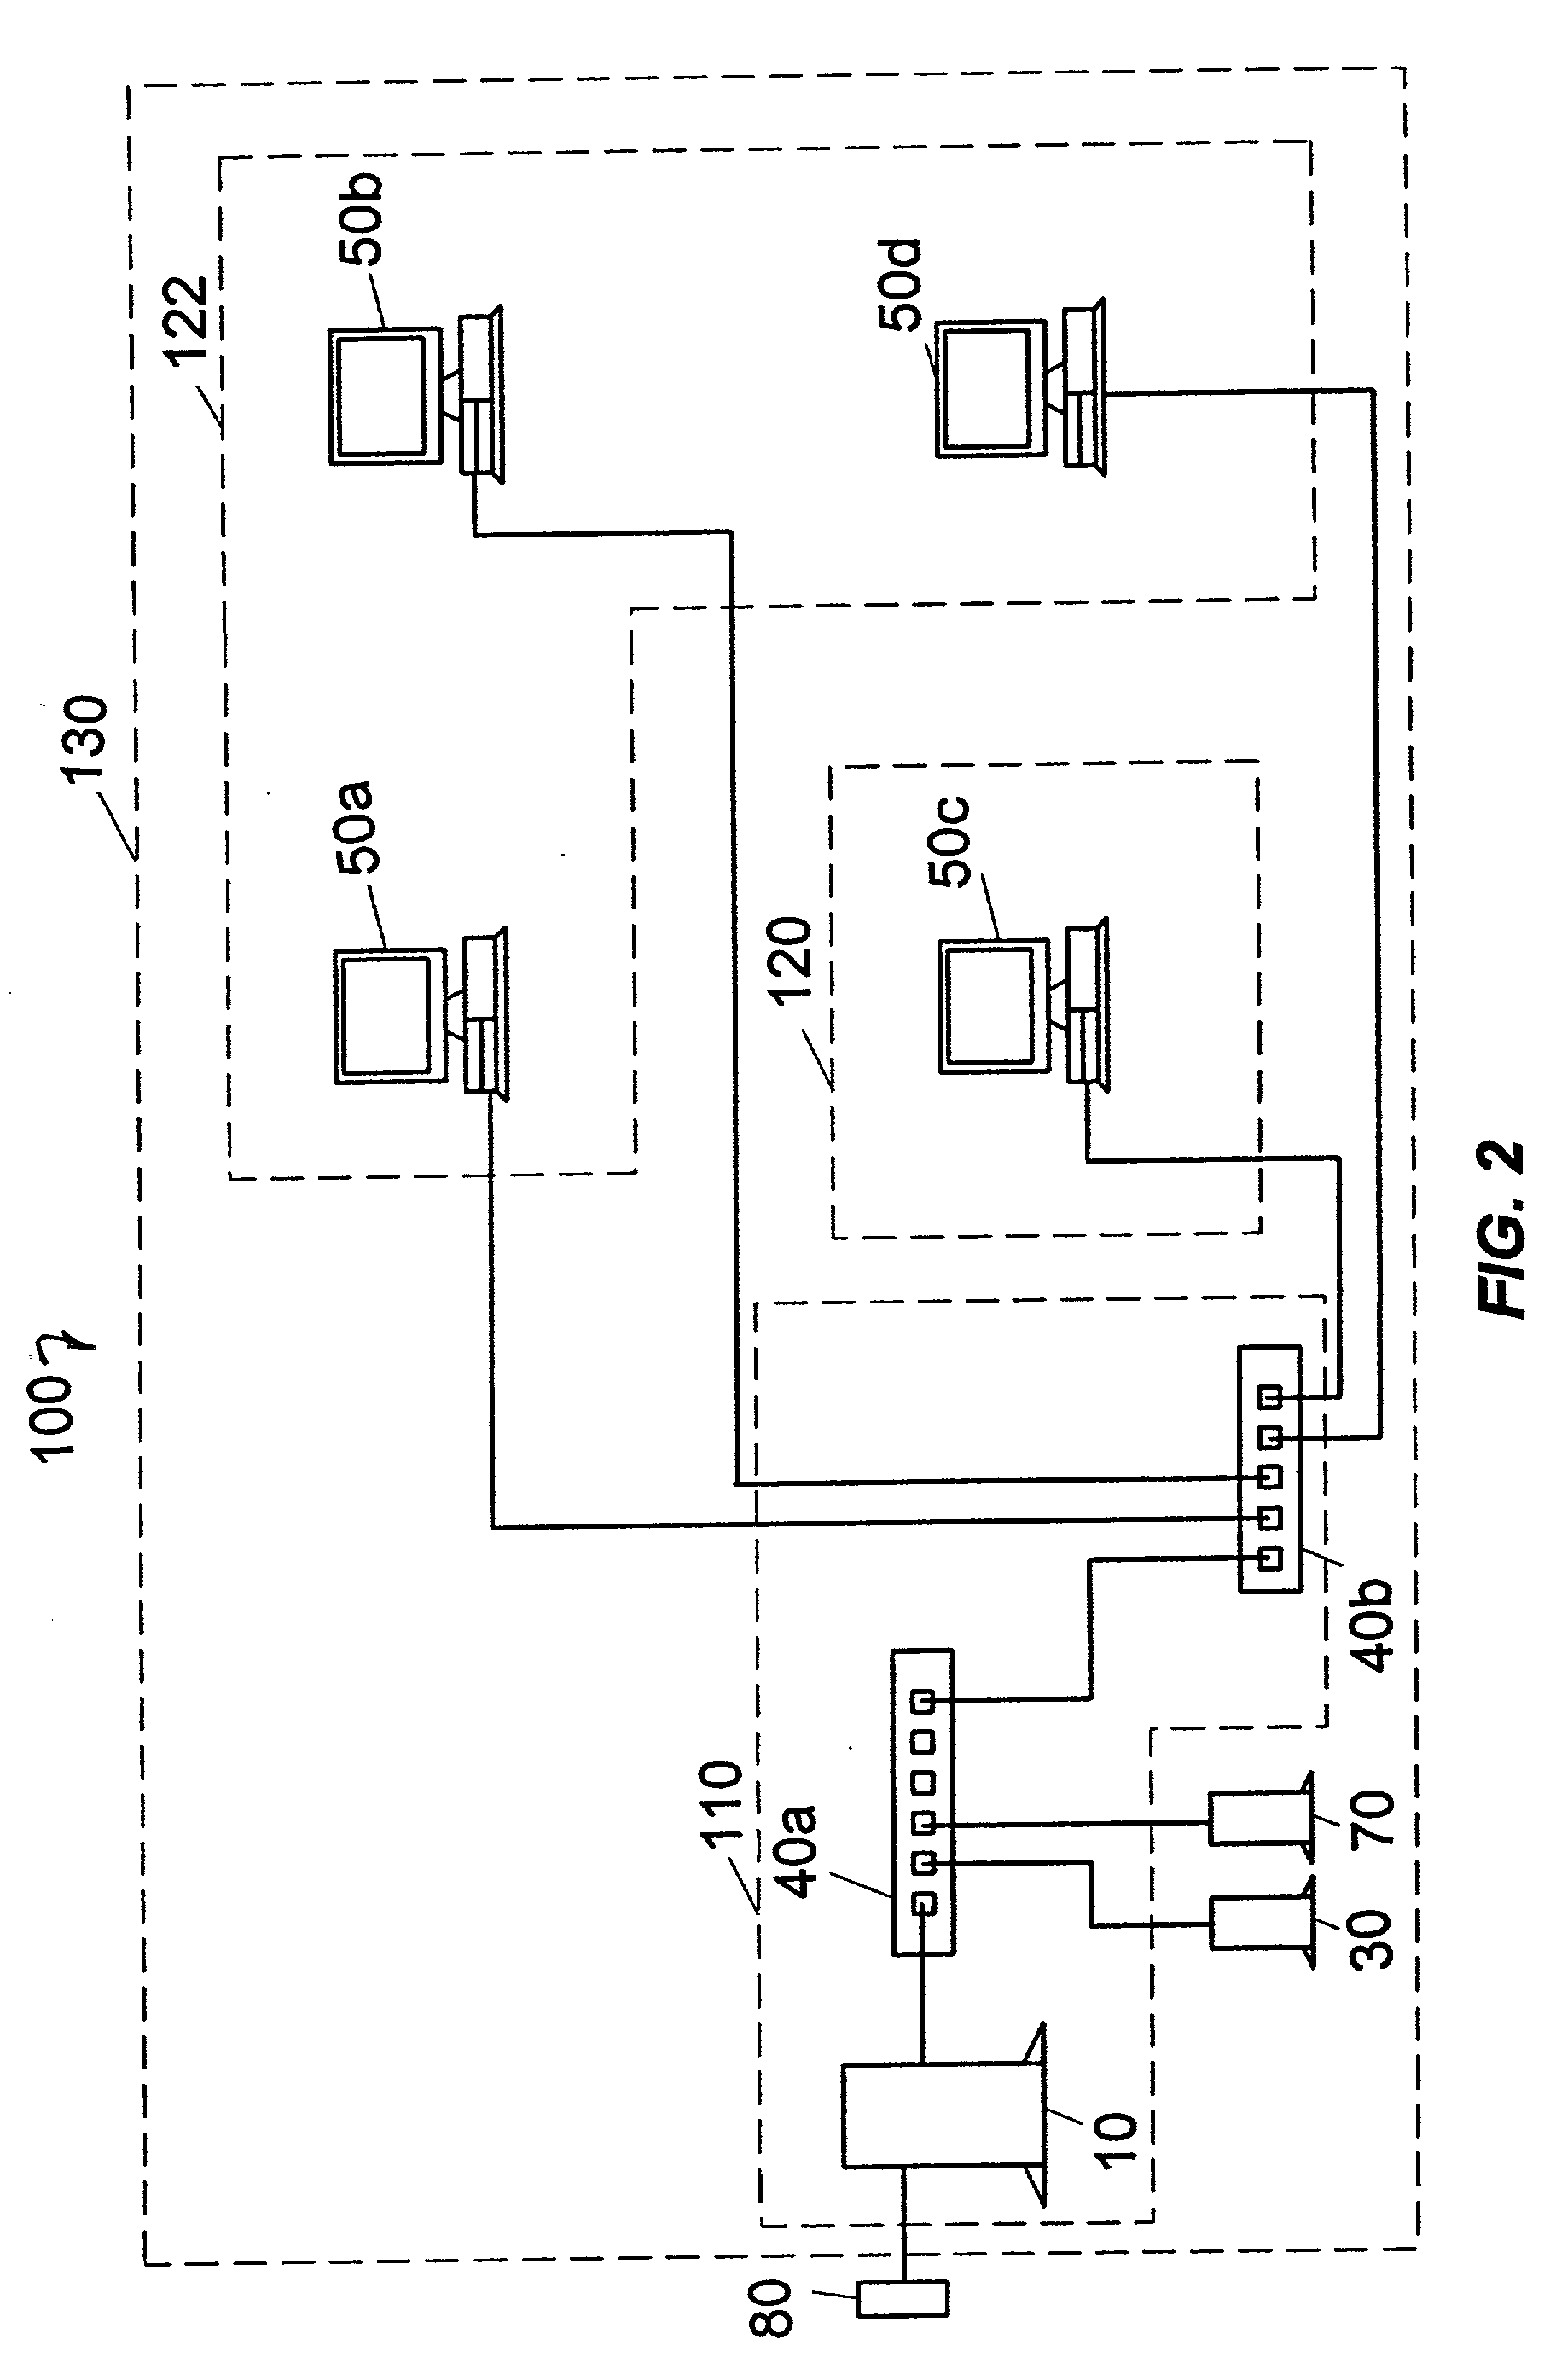 Management system and method for network devices using information recordable medium